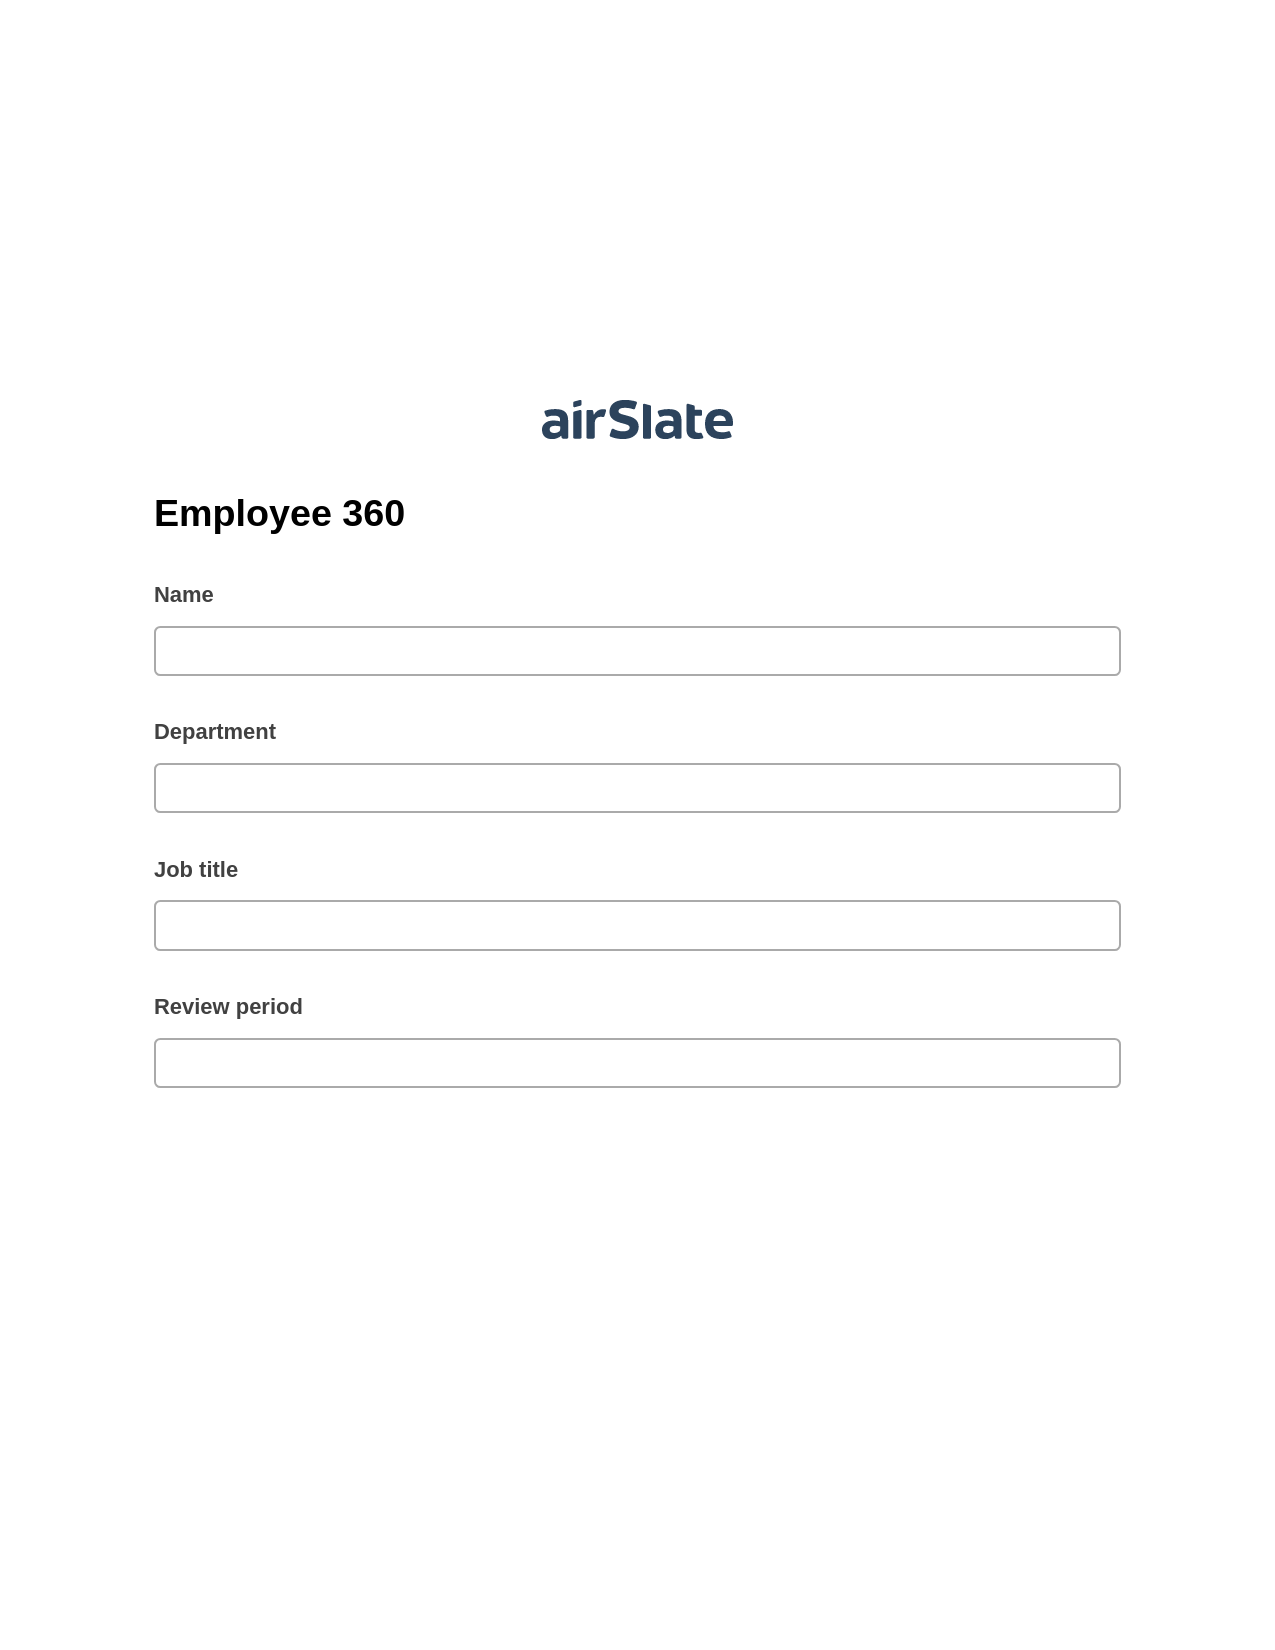 Multirole Employee 360 Pre-fill Dropdowns from CSV file Bot, Export to MS Dynamics 365 Bot, Archive to Dropbox Bot